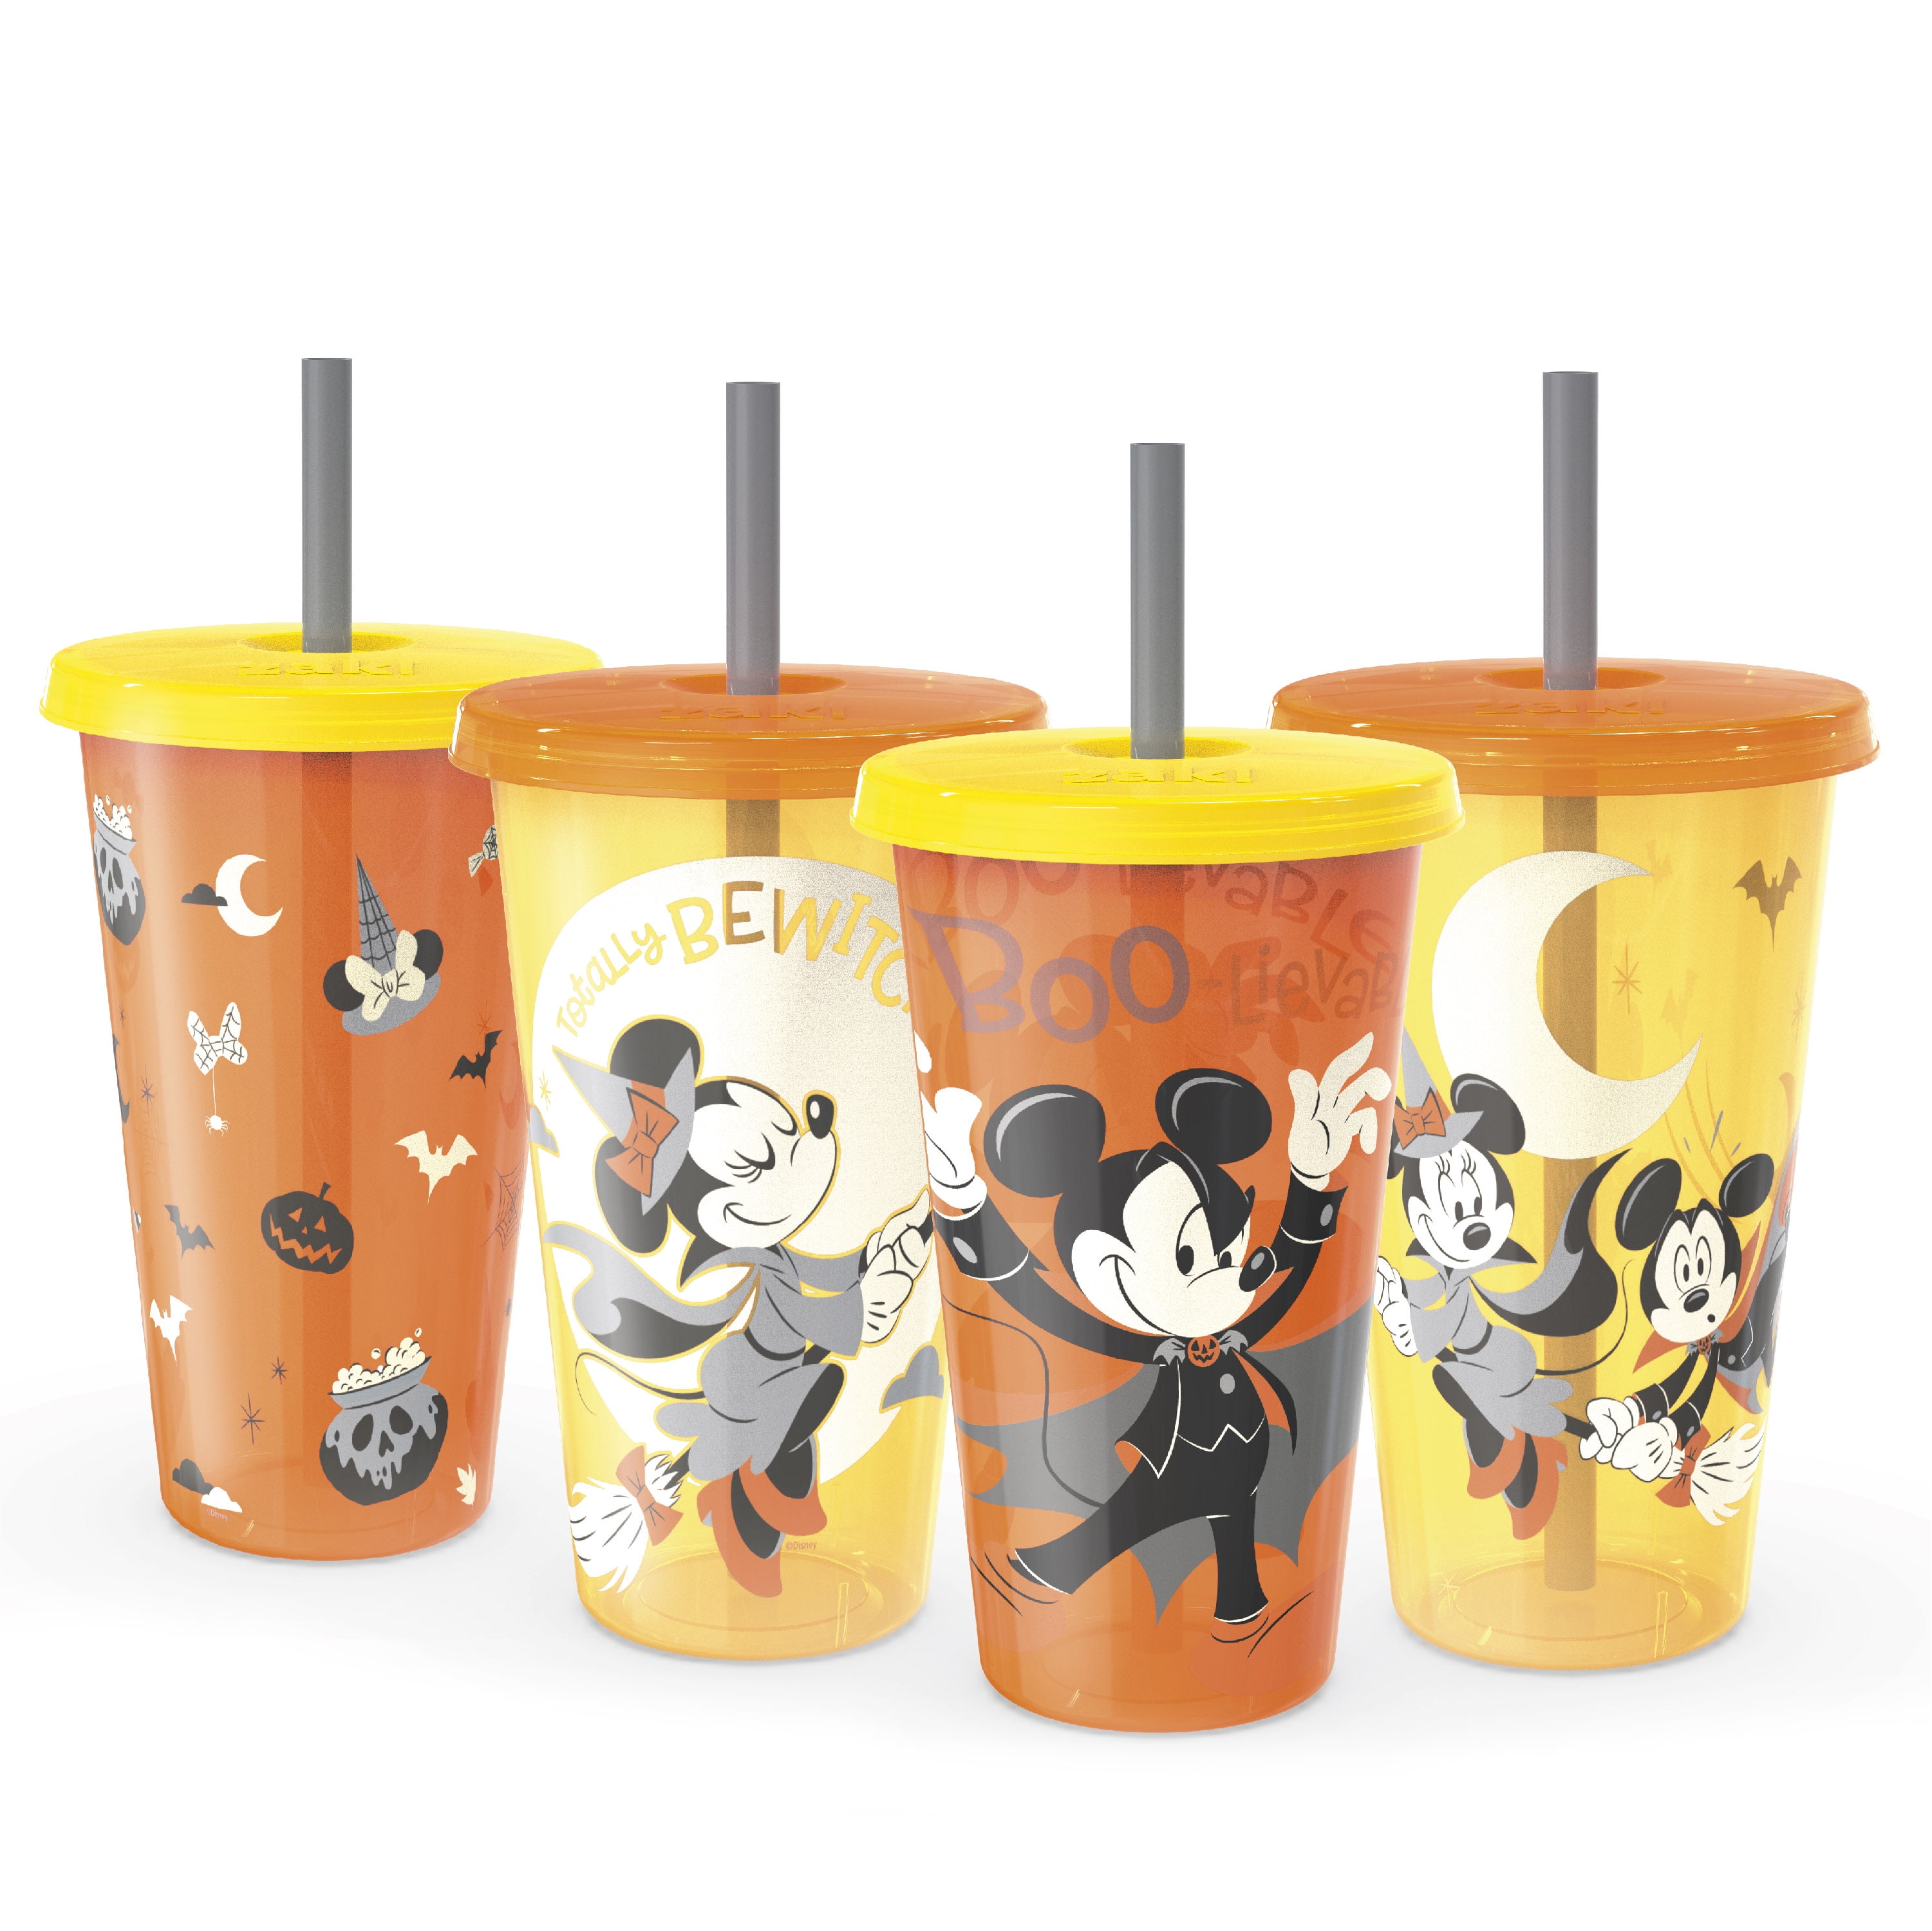 Zak Designs Disney Villains Halloween Glow in The Dark Tumbler Set with Lid and Straw for Cold Drinks, Funny Cups Made of Durable and Reusable Plastic